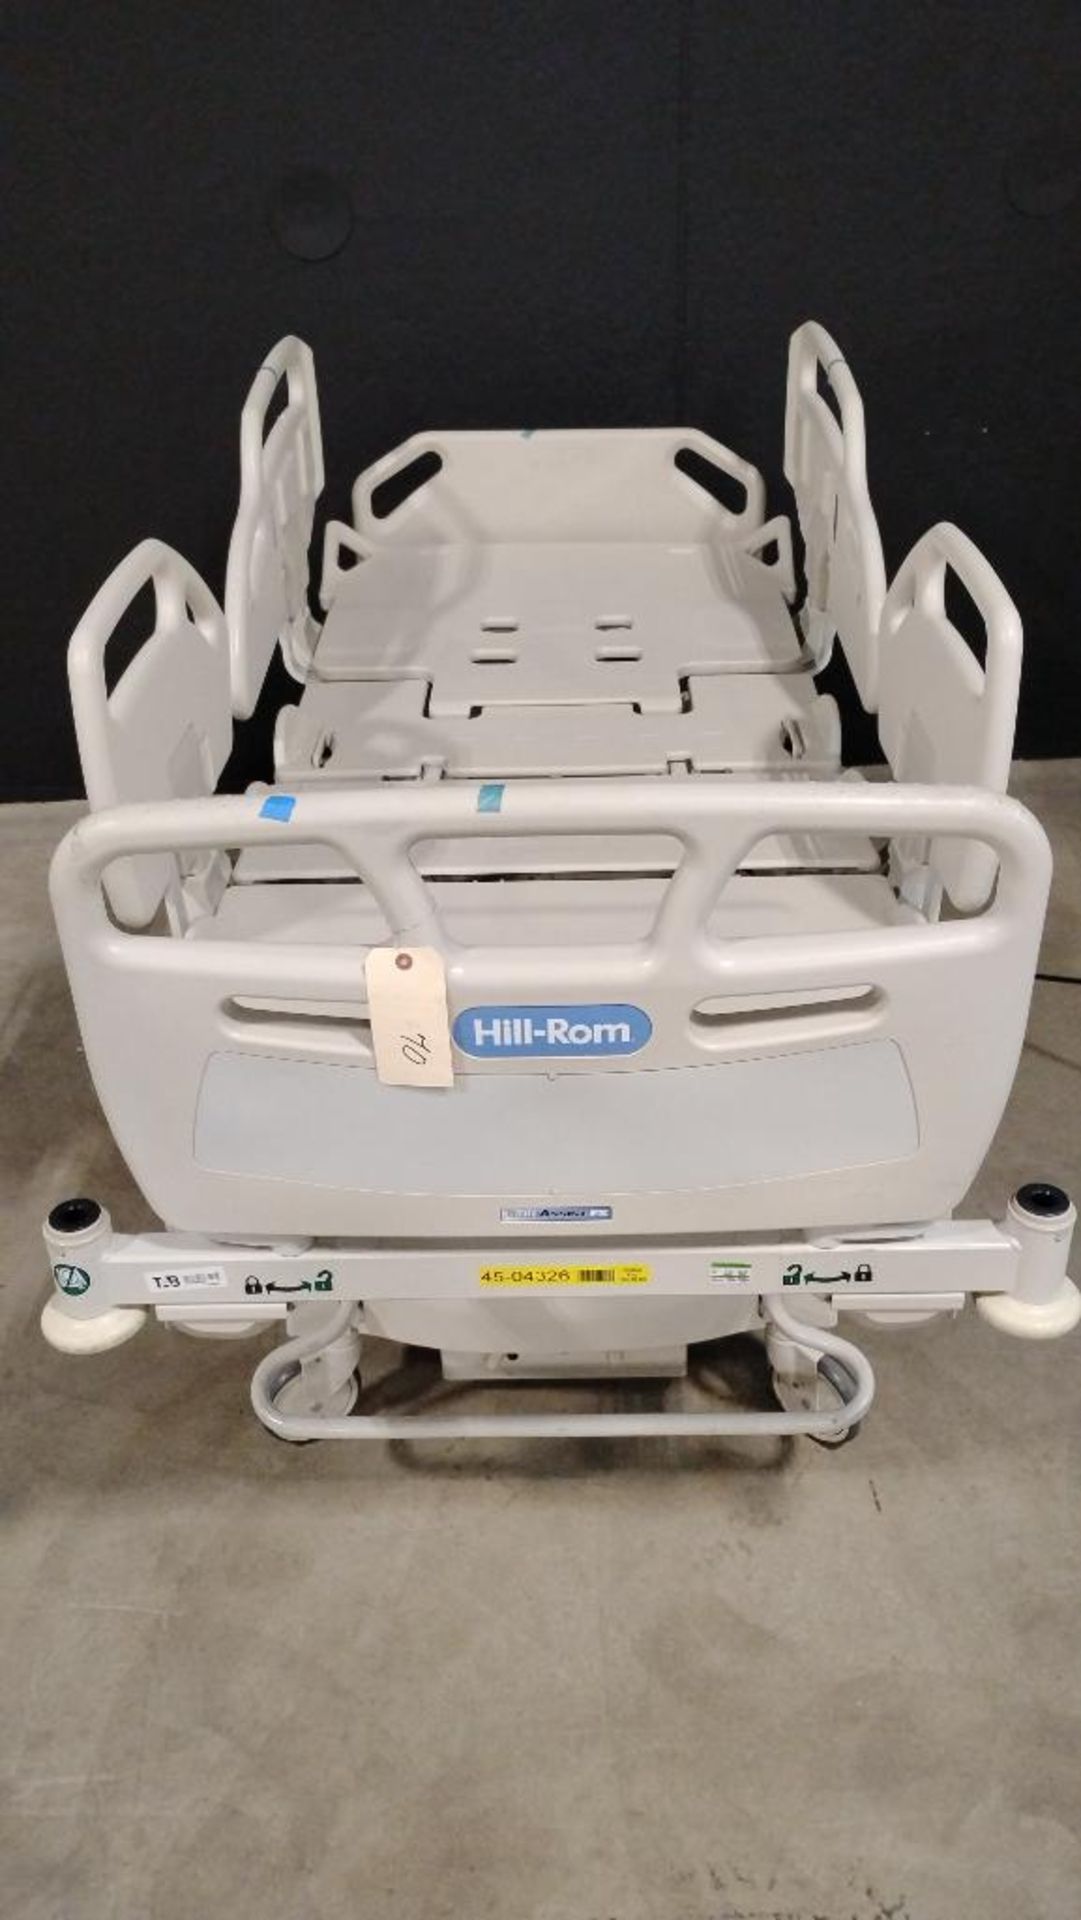 HILL-ROM CARE ASSIST ES 1170G HOSPITAL BED - Image 3 of 4